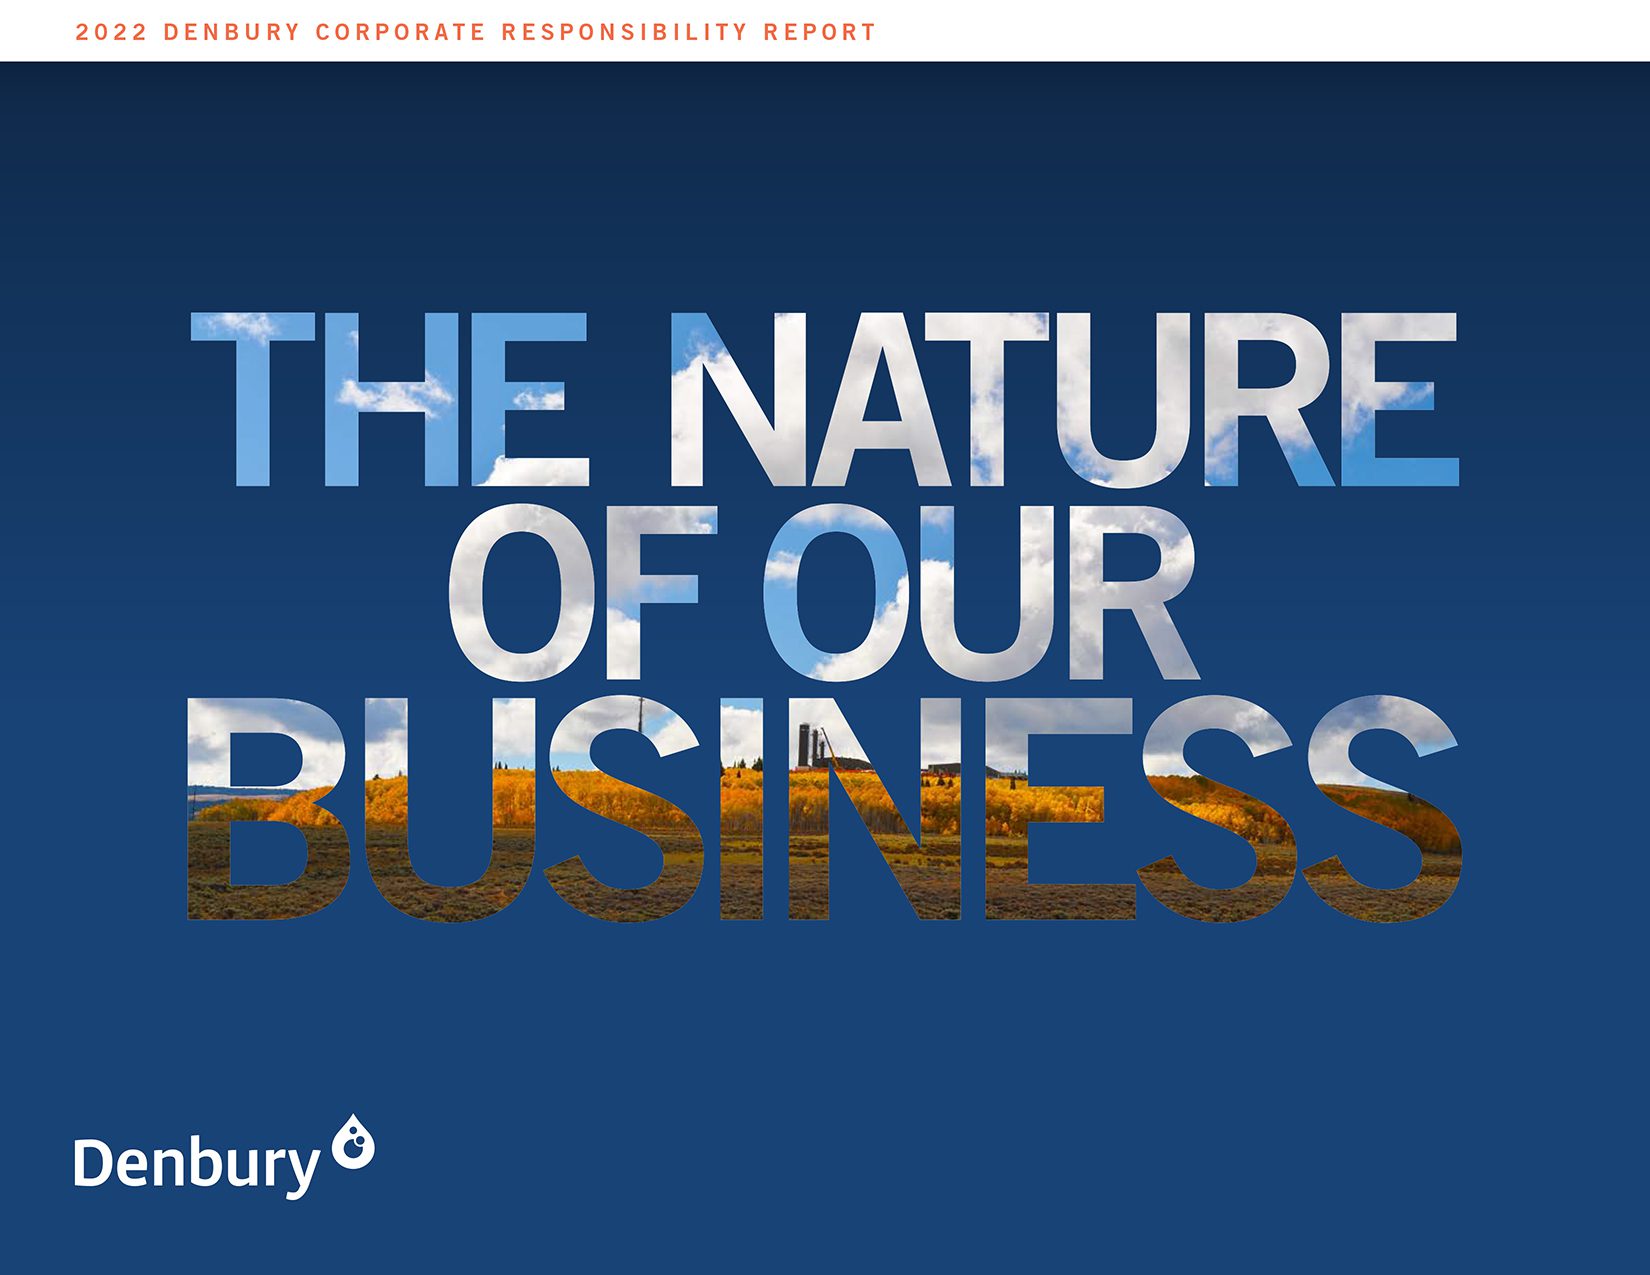 For more information on how Denbury is managing our carbon footprint, see our 2022 Corporate Responsibility Report.